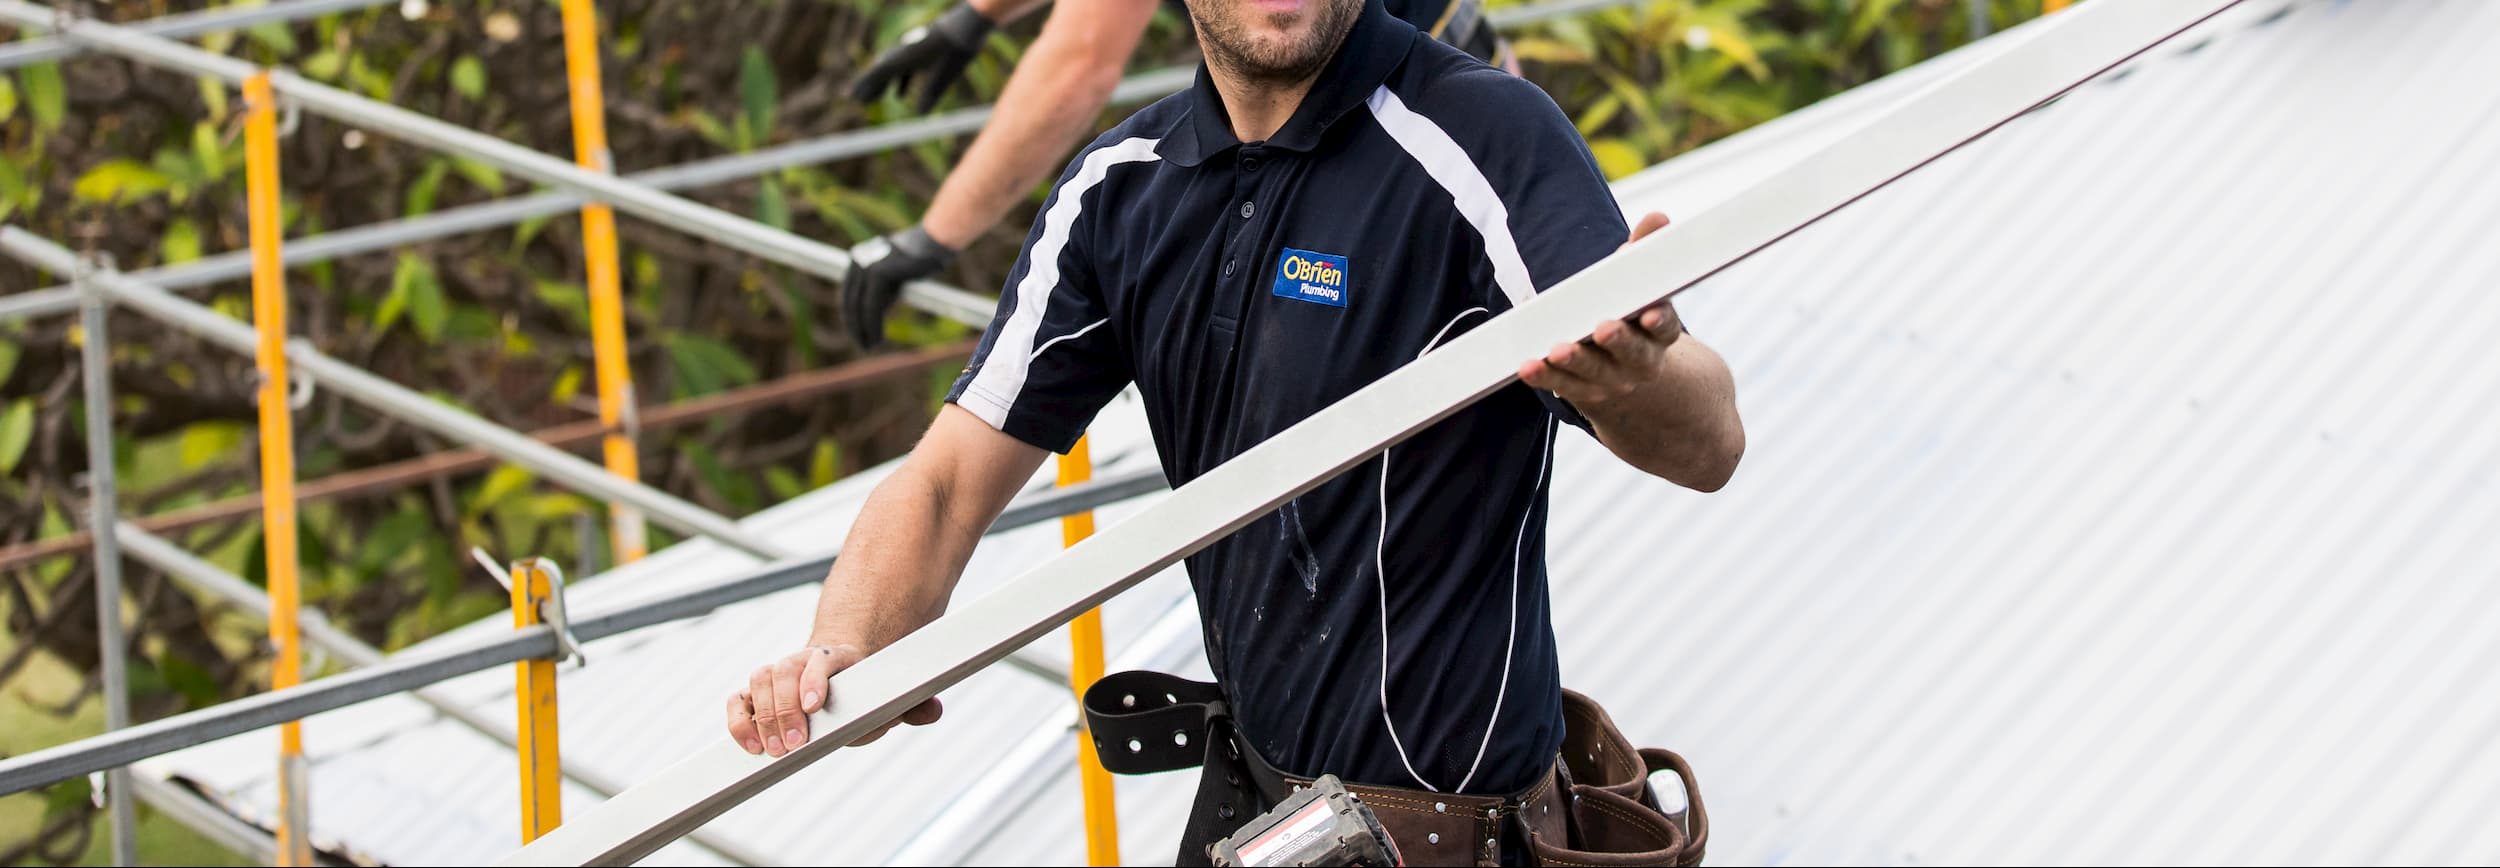 roofing and guttering contractor on a roof